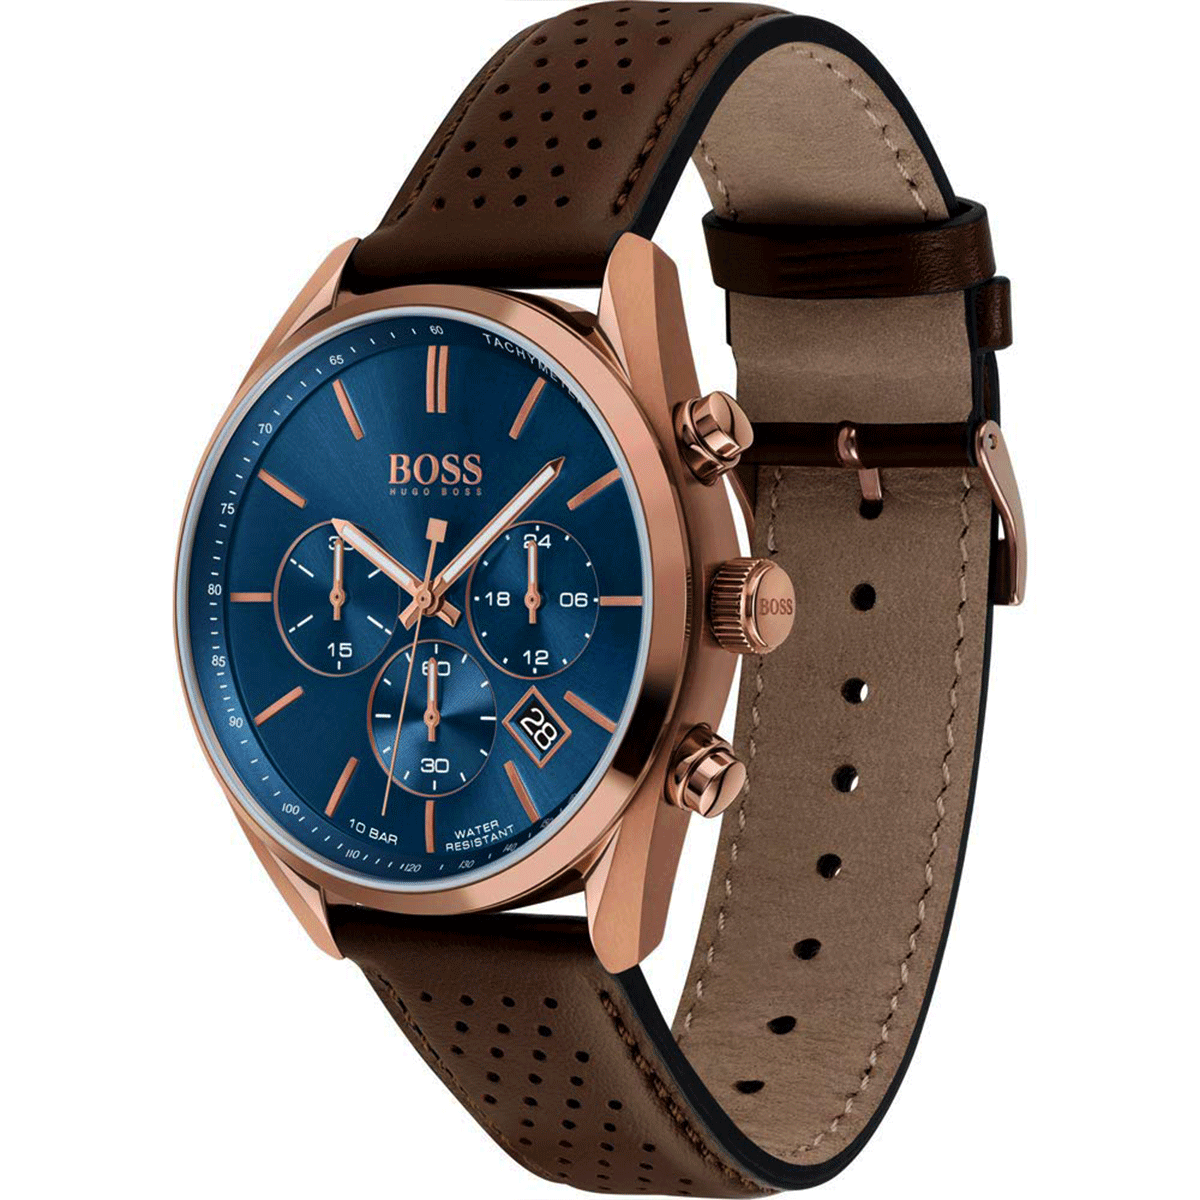 Men watch with brown leather strap and blue dial